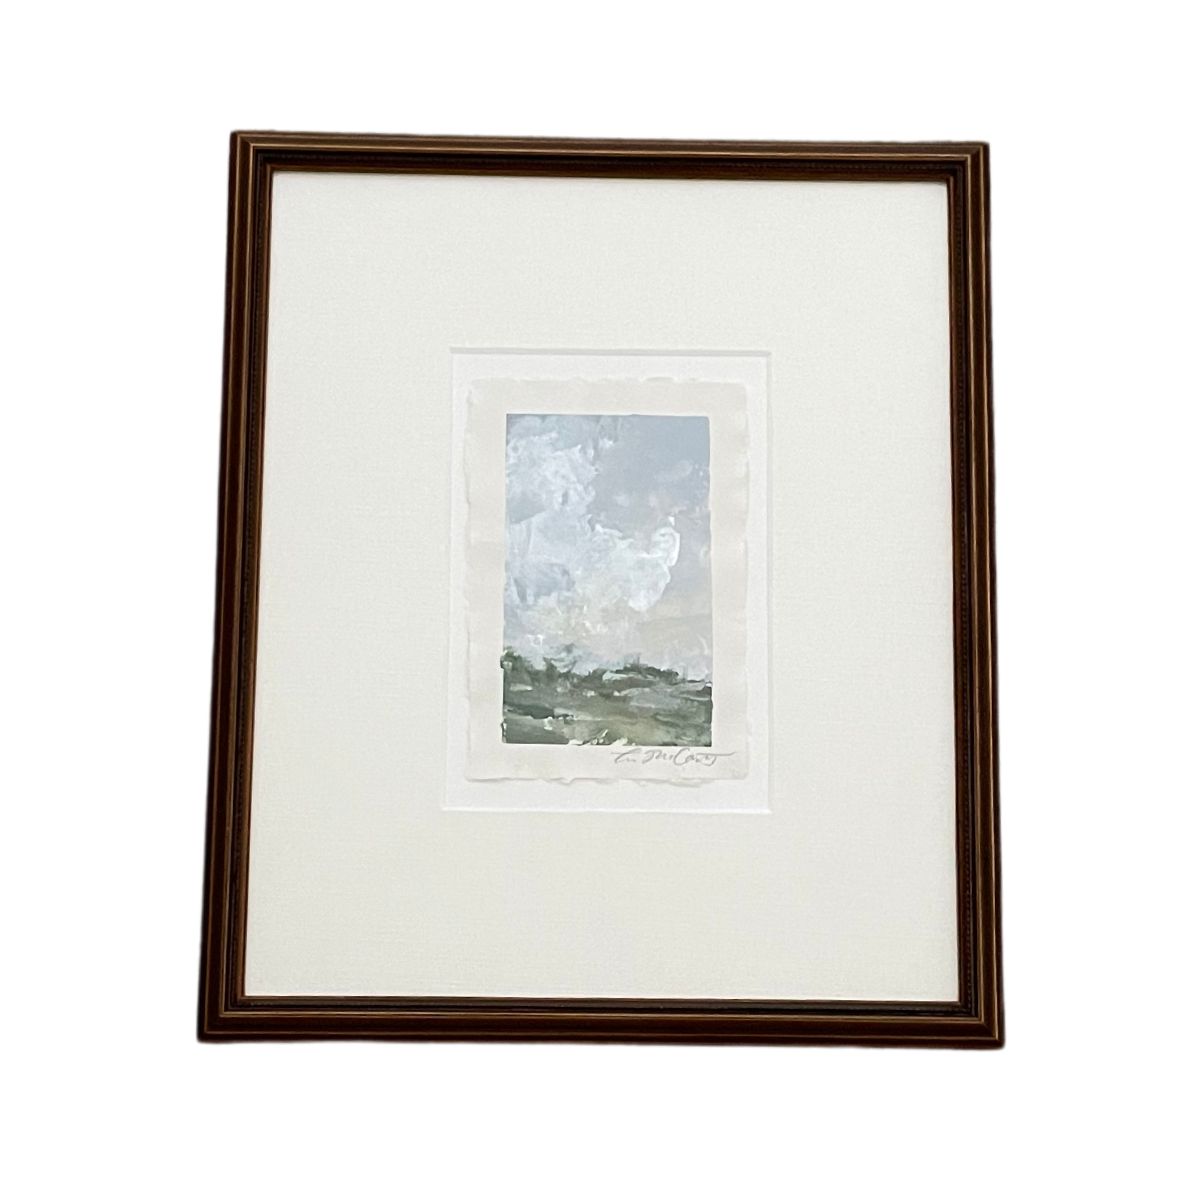 Framed Landscape by Laura McCarty #8